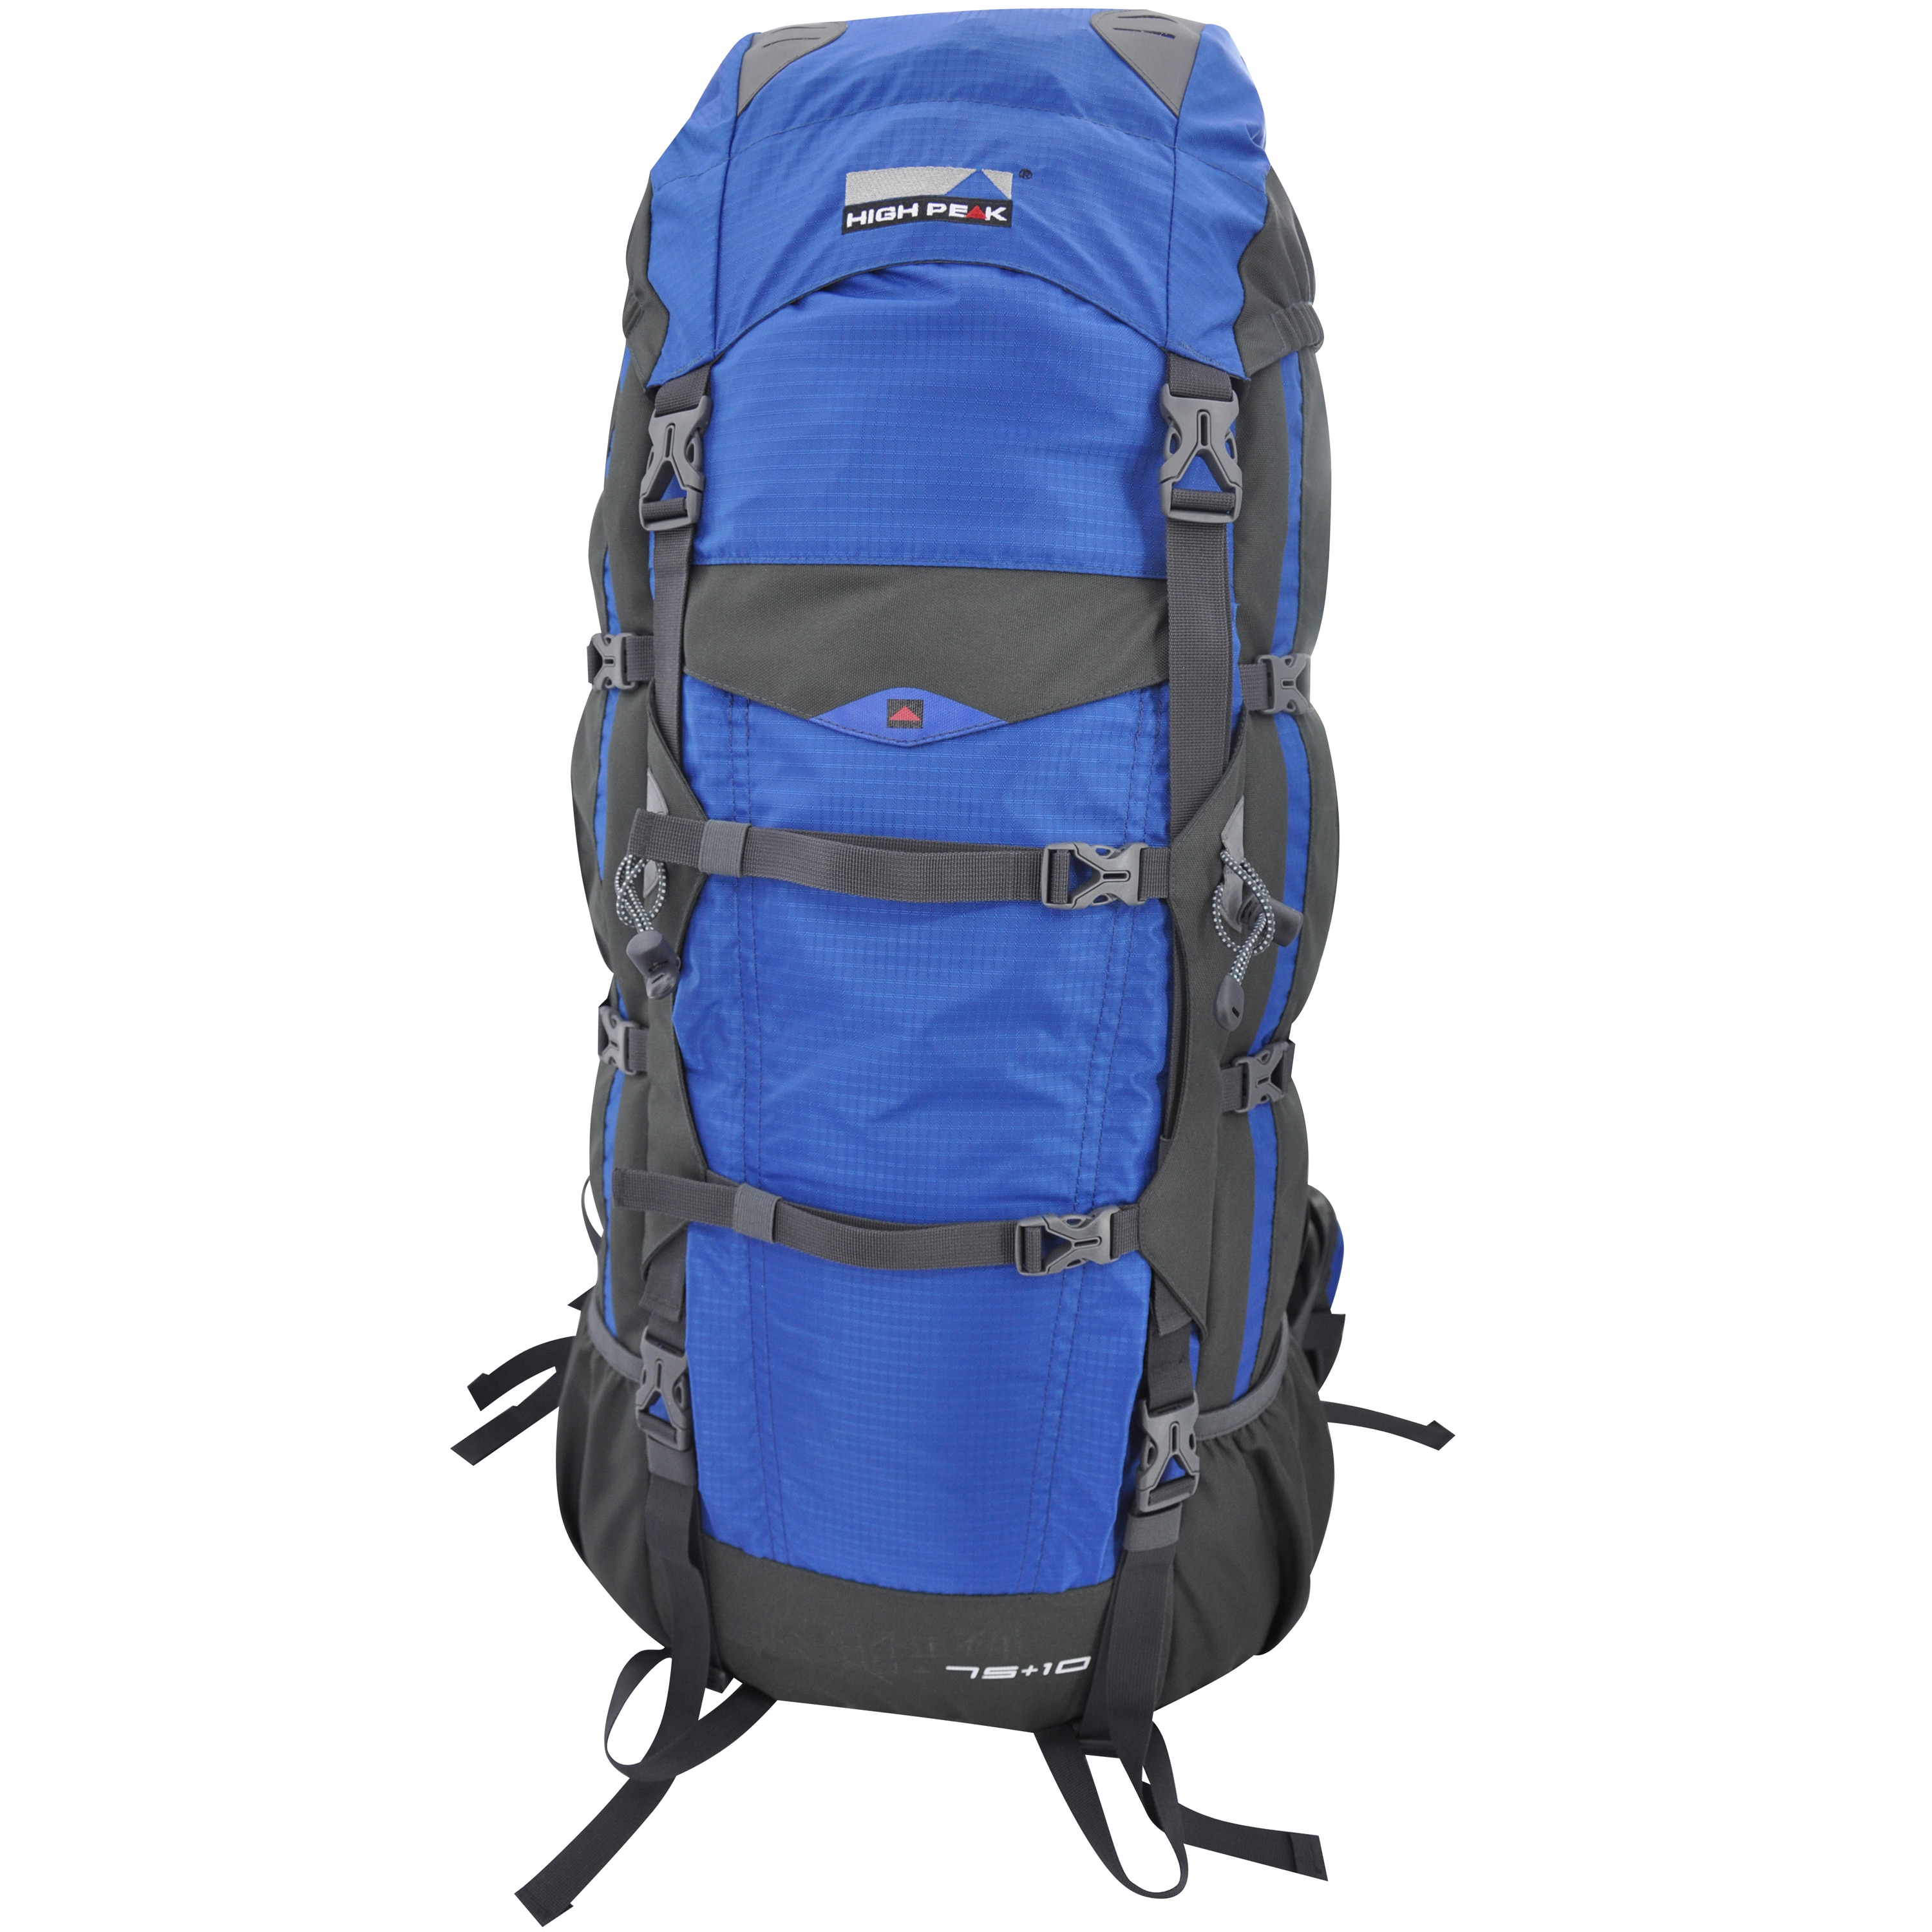 High Peak Outdoors TH75 Tahoe 75 Plus 10 Expedition Backpack - image 2 of 3